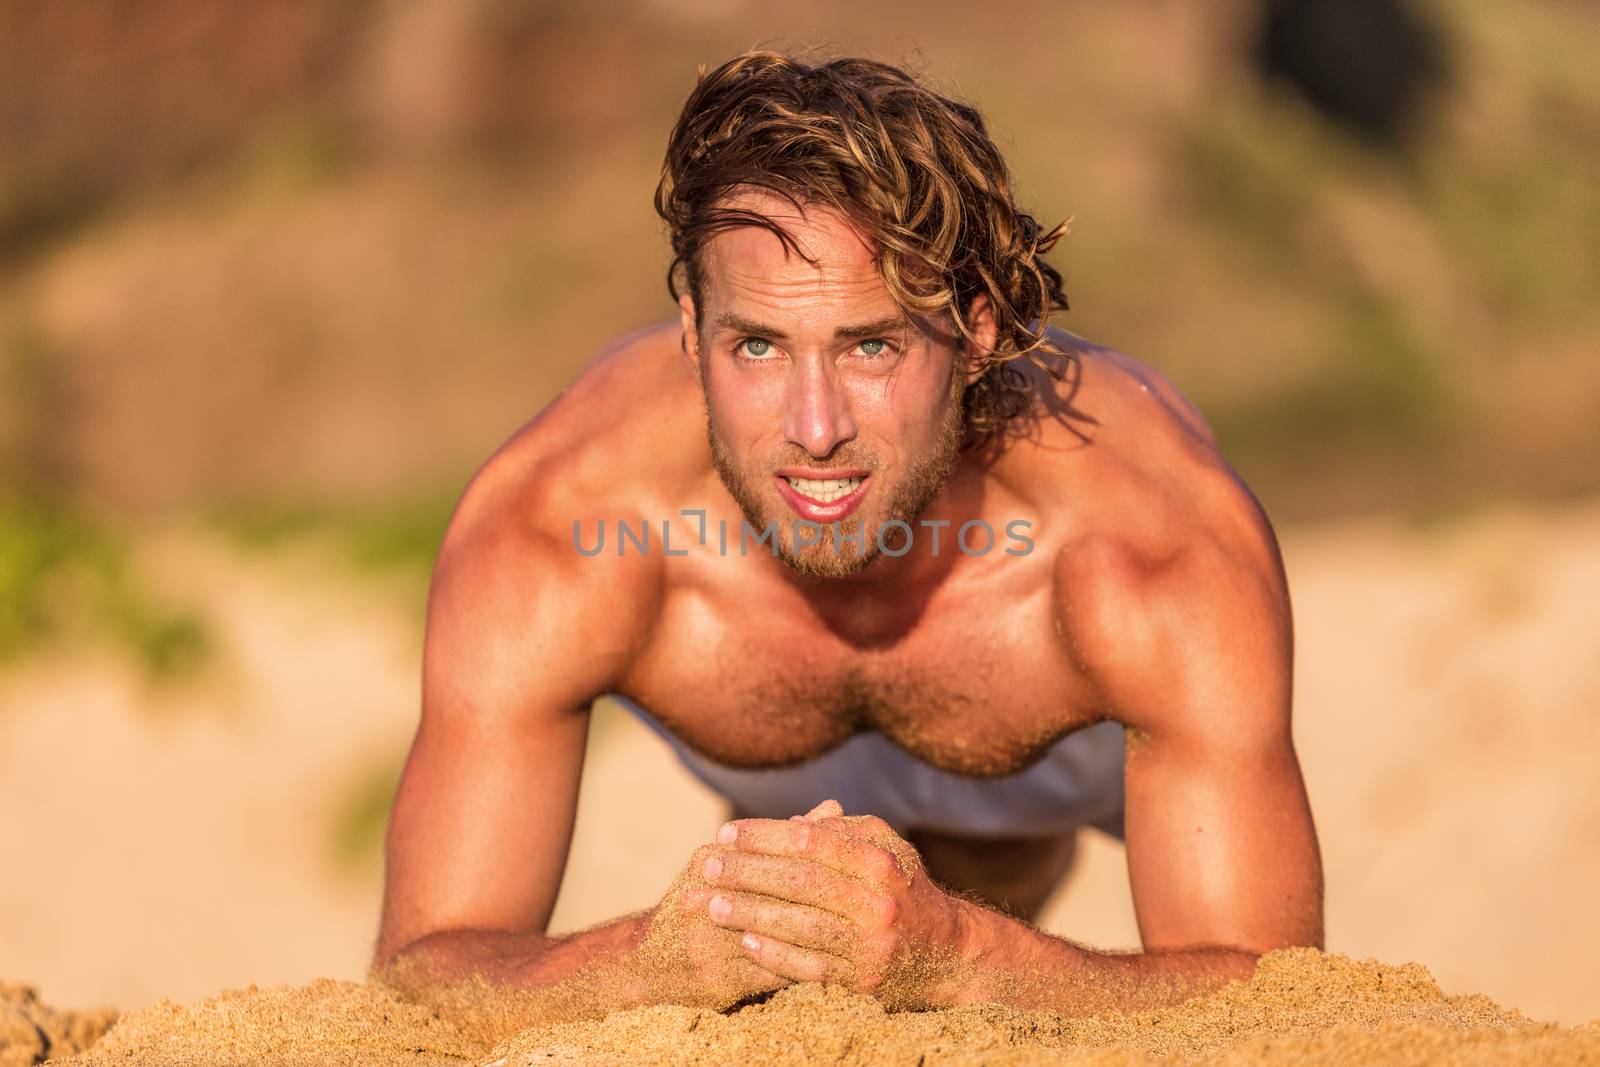 Fitness planking workout man doing plank exercise on beach at sunset. Sexy shirtless male athlete strength training sweating working out core body exercises.